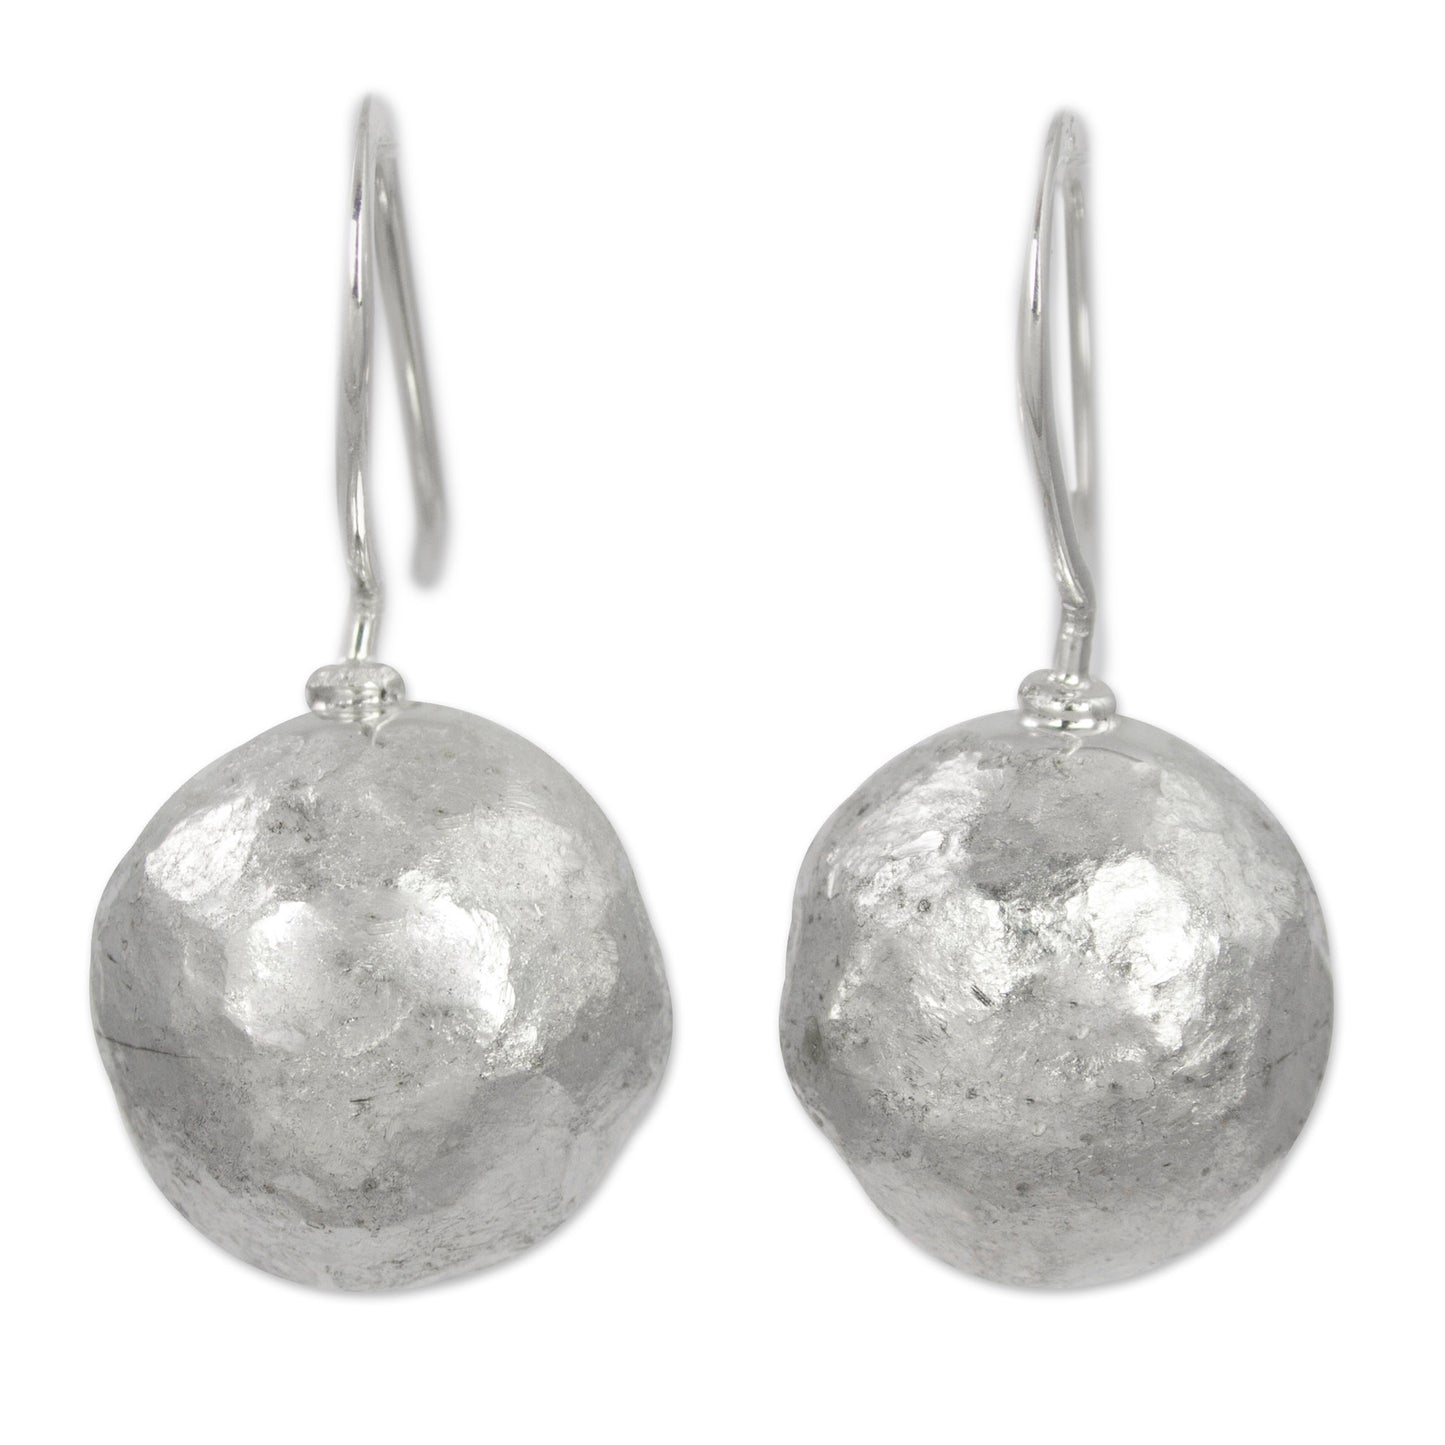 Nature's Treasures Hand Made Sterling Silver Round Drop Earrings from Mexico